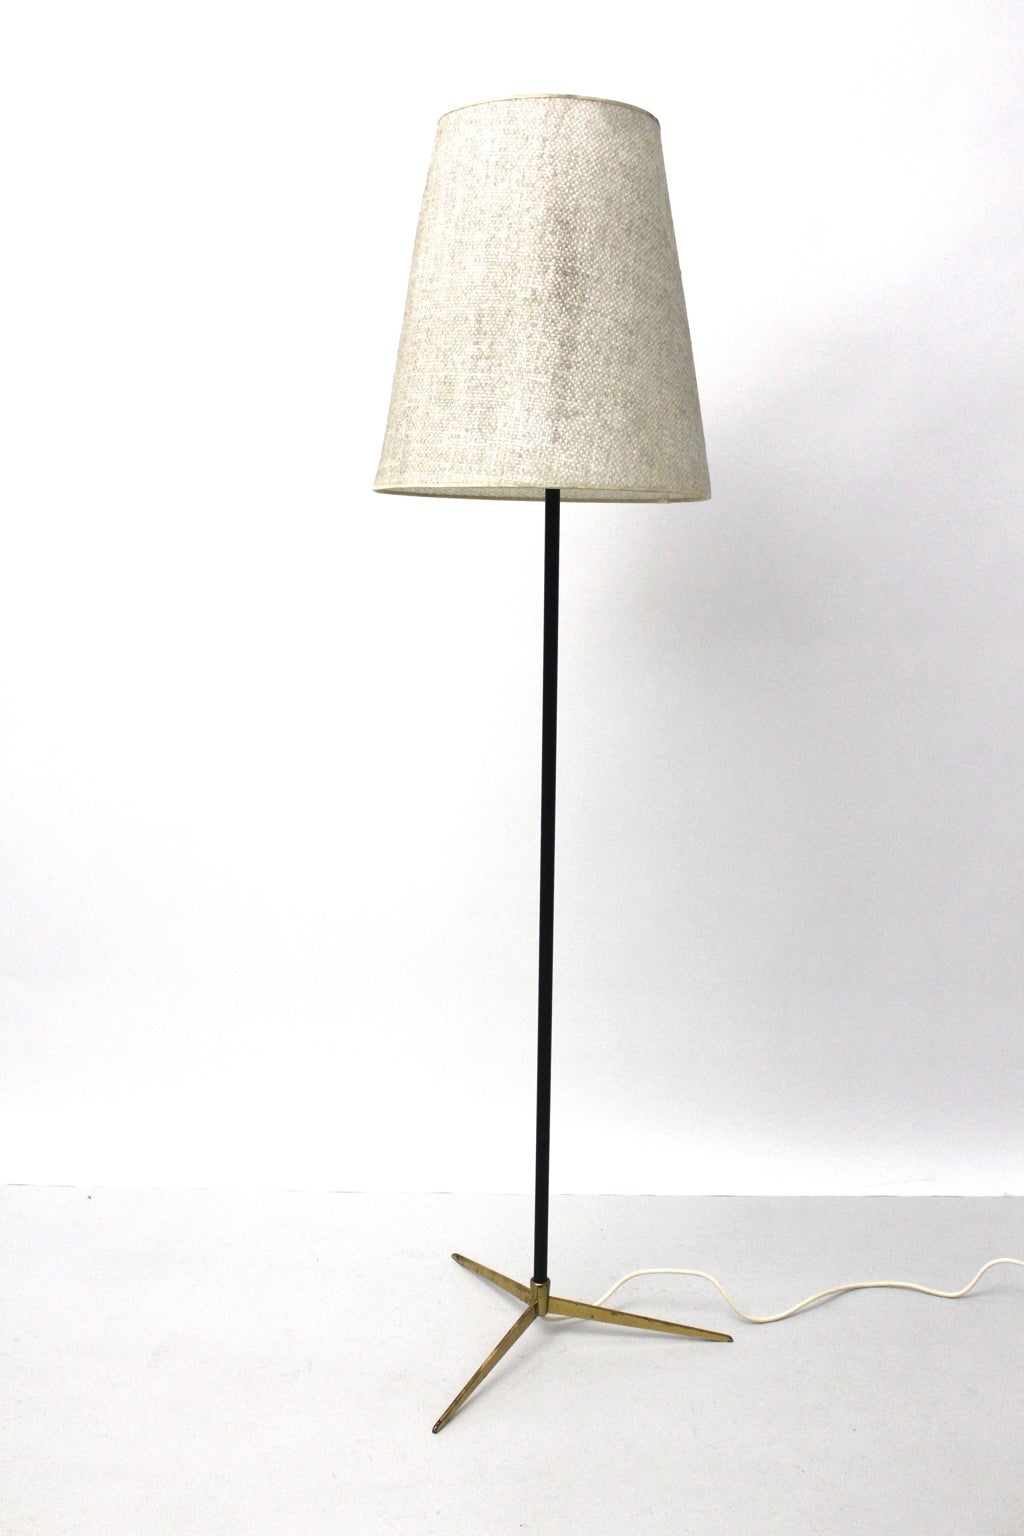 Mid century modern vintage floor lamp, which was designed and executed by J. T. Kalmar, Vienna, 1960.
The design of this floor lamp fits also into a modern interior due to its simpleness. It has the model number 2092 and is named Micheline.
The